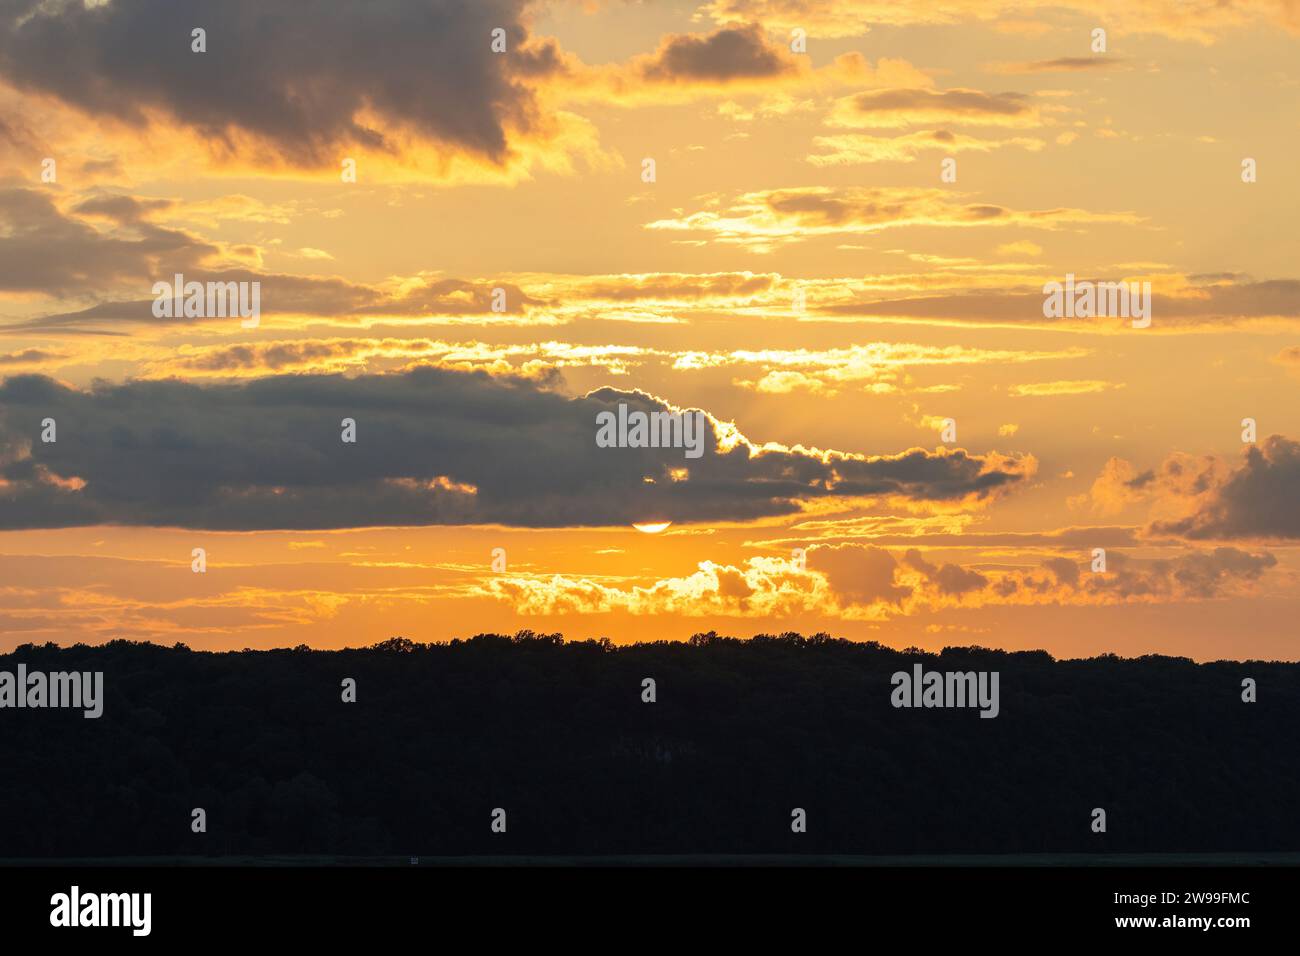 A serene landscape with vibrant yellow sunset skies partially obscured by clouds, featuring a horizon line composed of both land and water Stock Photo